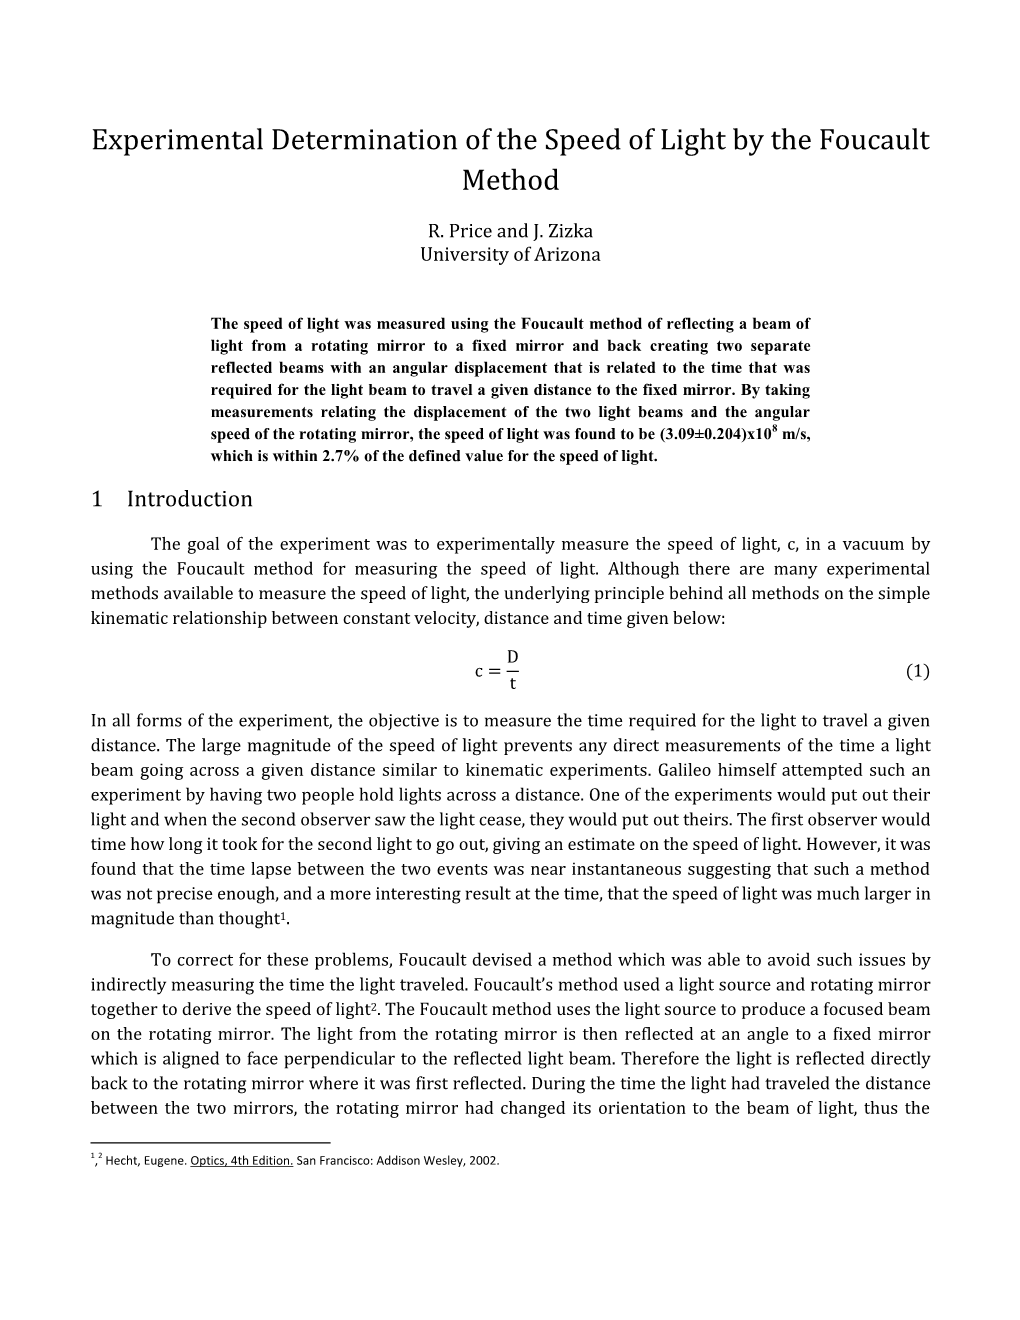 Experimental Determination of the Speed of Light by the Foucault Method